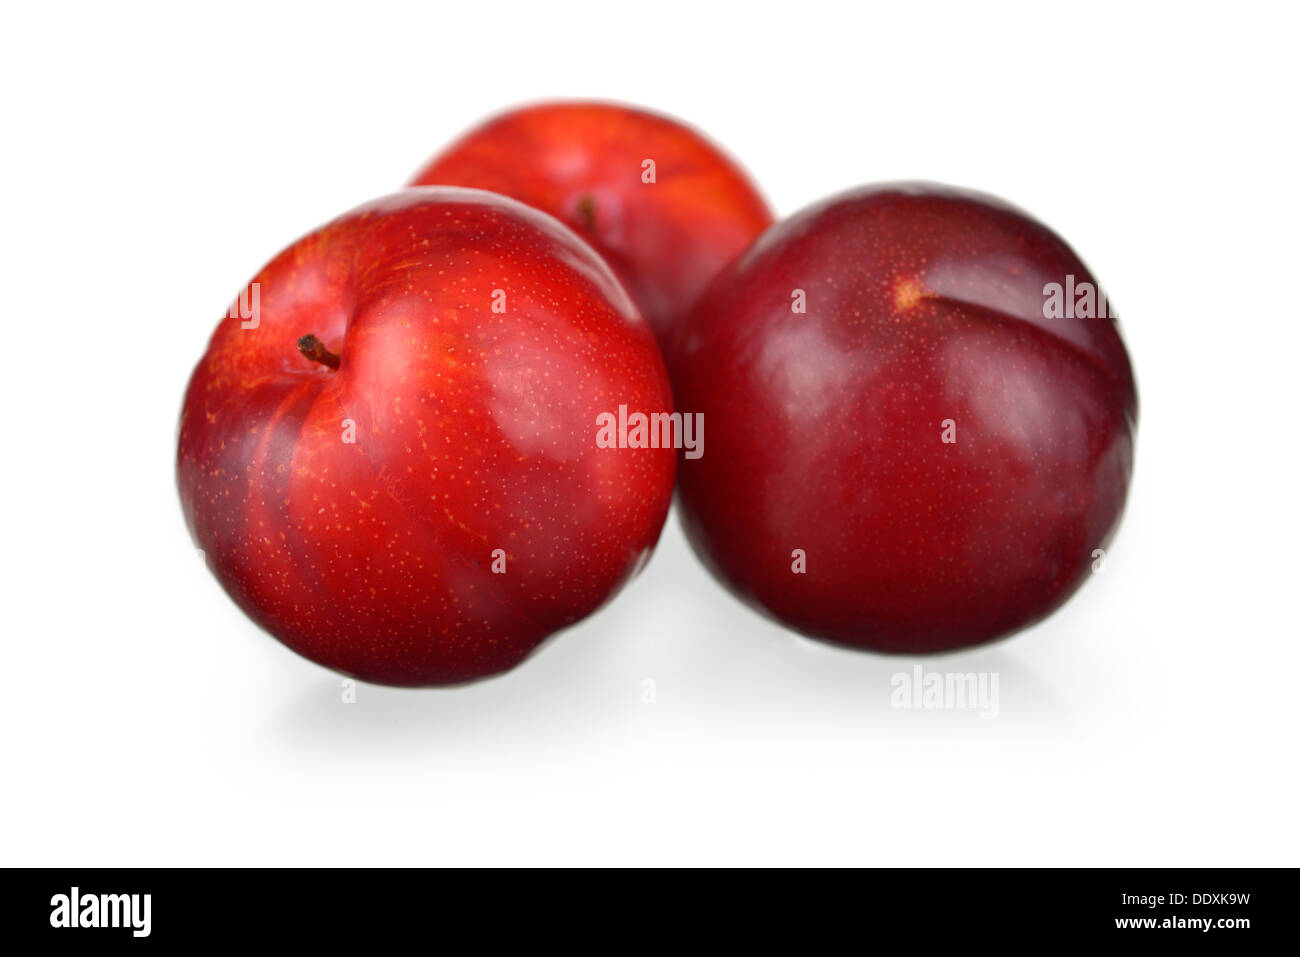 Plums, Plum, Whole Red Plums Stock Photo